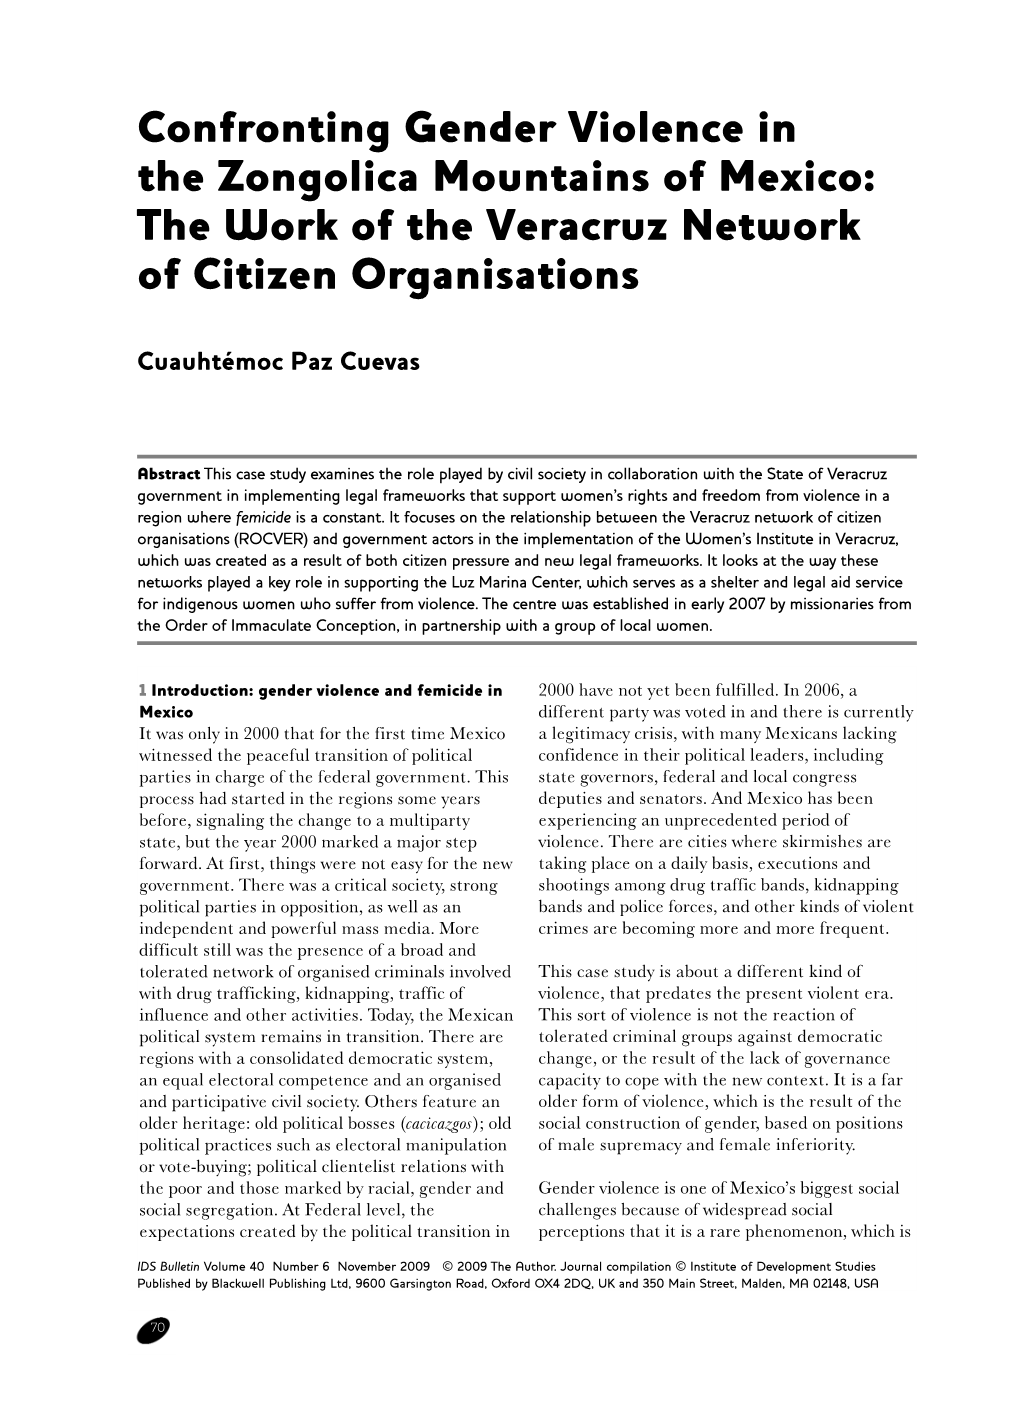 Confronting Gender Violence in the Zongolica Mountains of Mexico: the Work of the Veracruz Network of Citizen Organisations